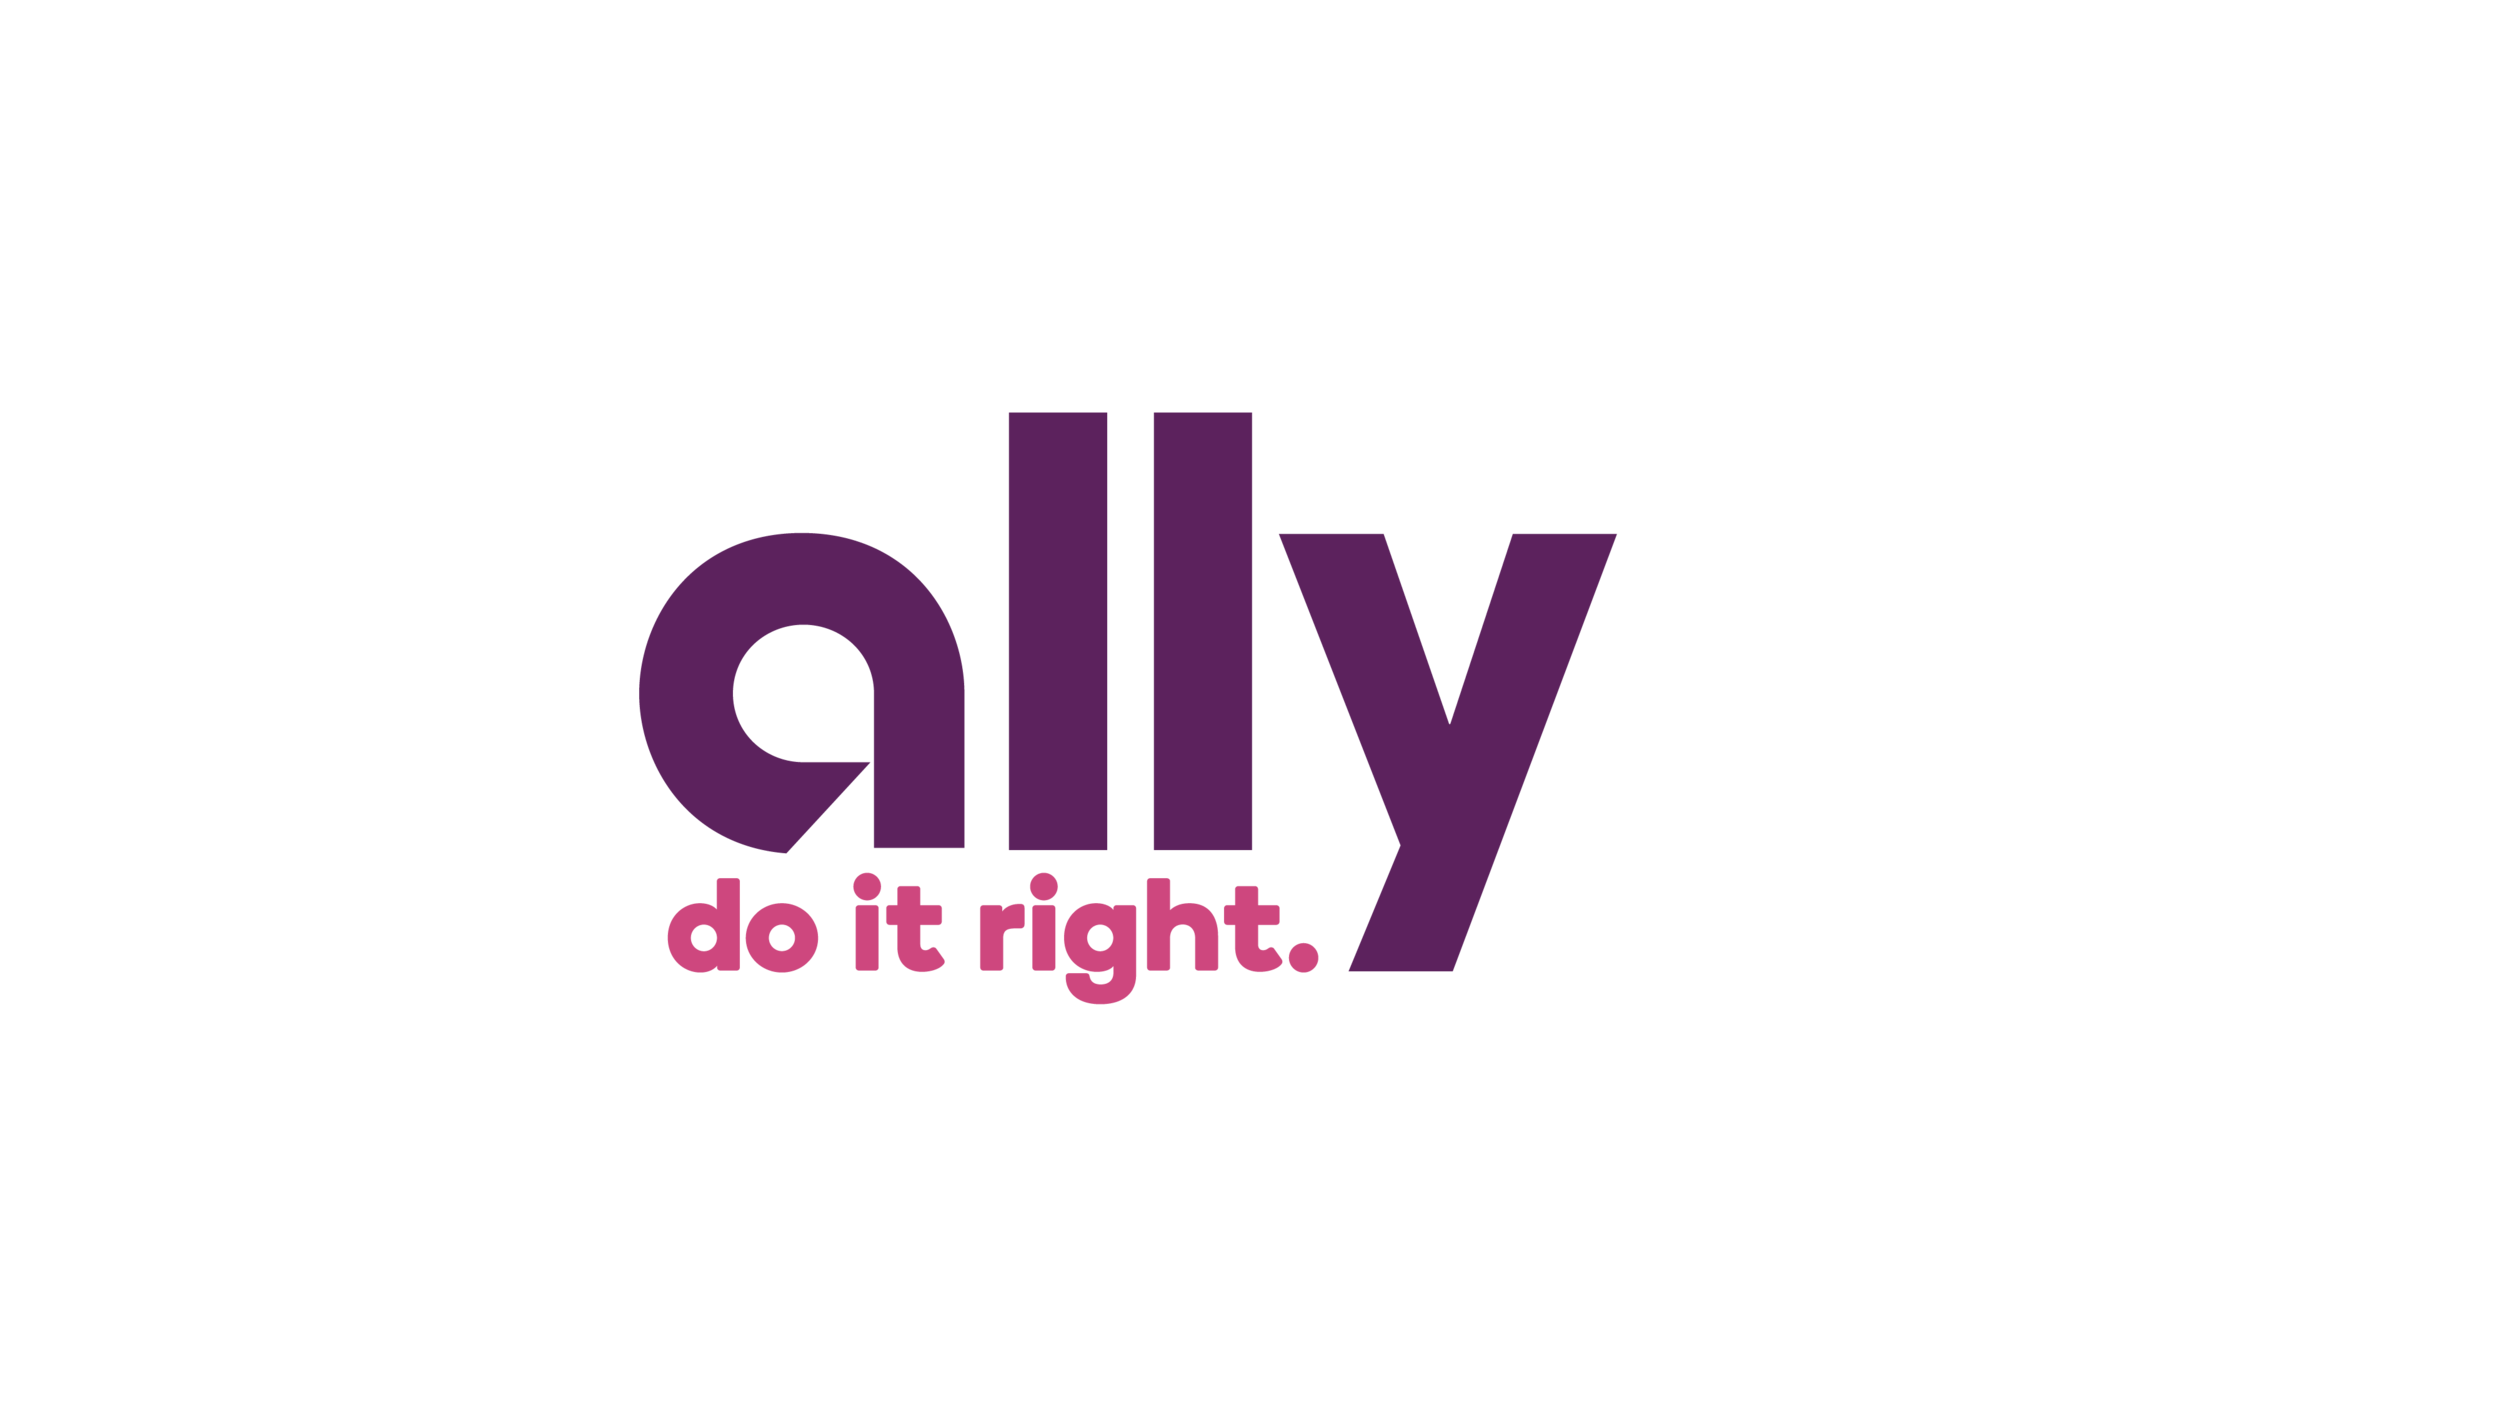 Ally_Final Logos and Pairings_11.14.2018-02 (1).png